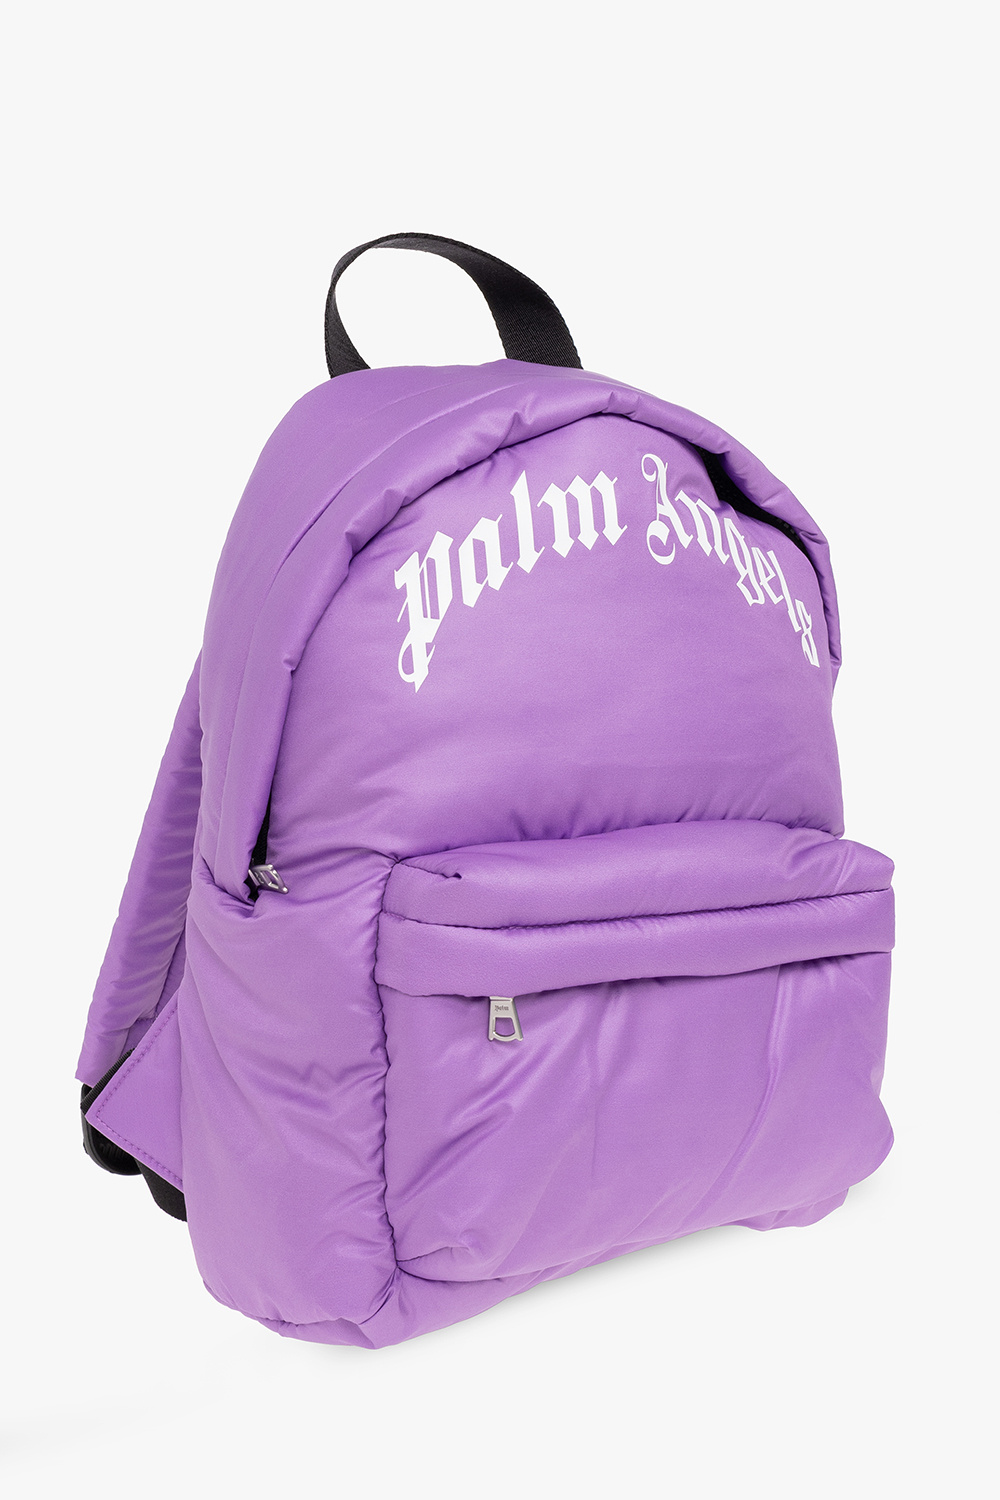 Palm Angels Kids Backpack with logo